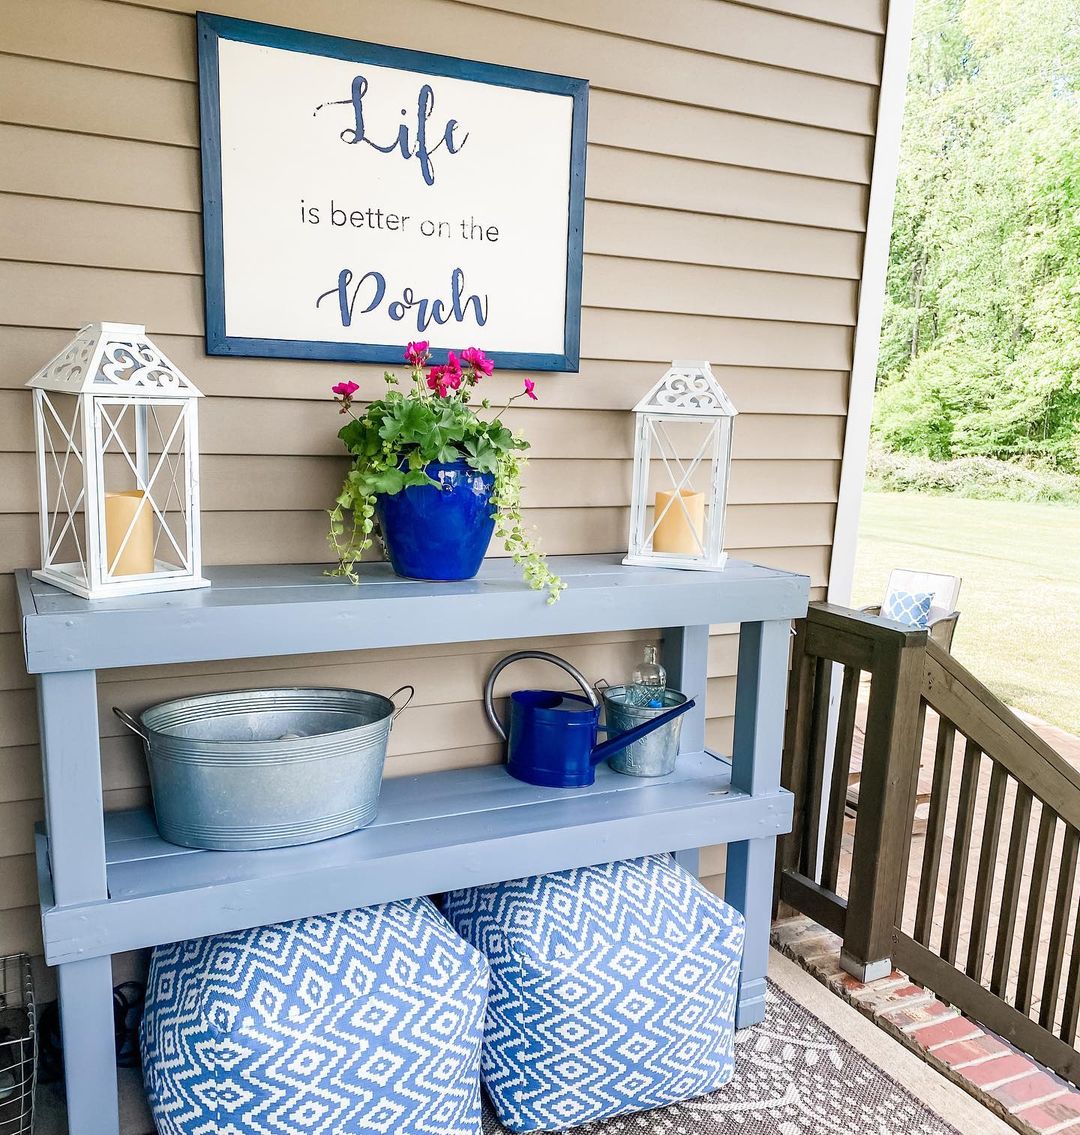 Outdoor Console Table Near the Deck Stairs. Photo by Instagram user @immeasurablymorehomes